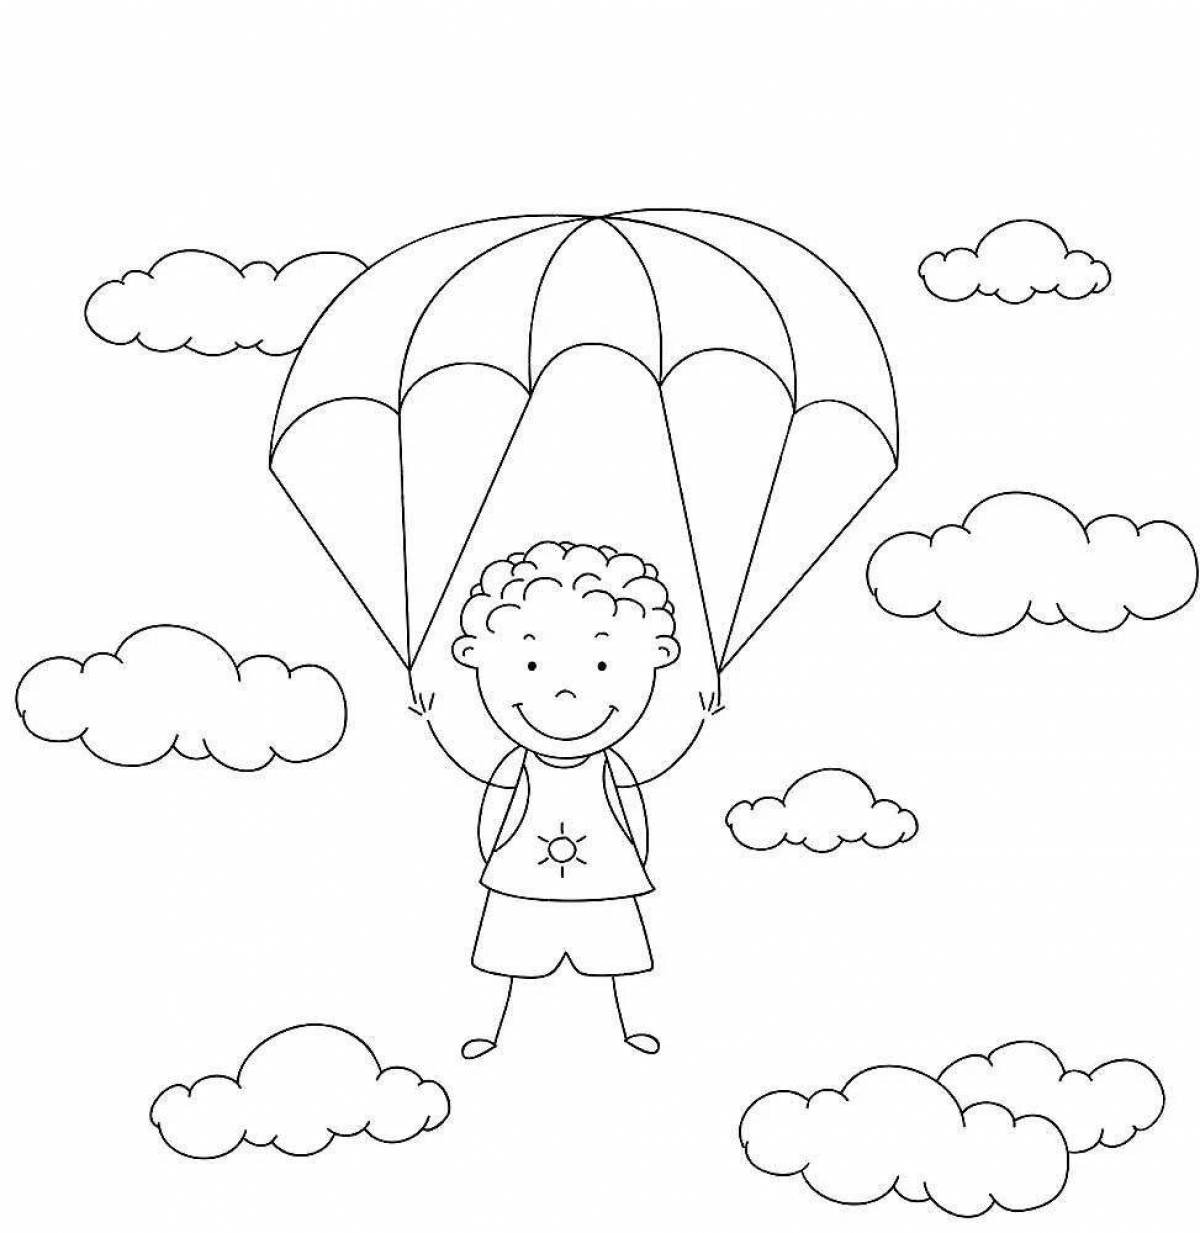 Amazing paratrooper coloring book for kids